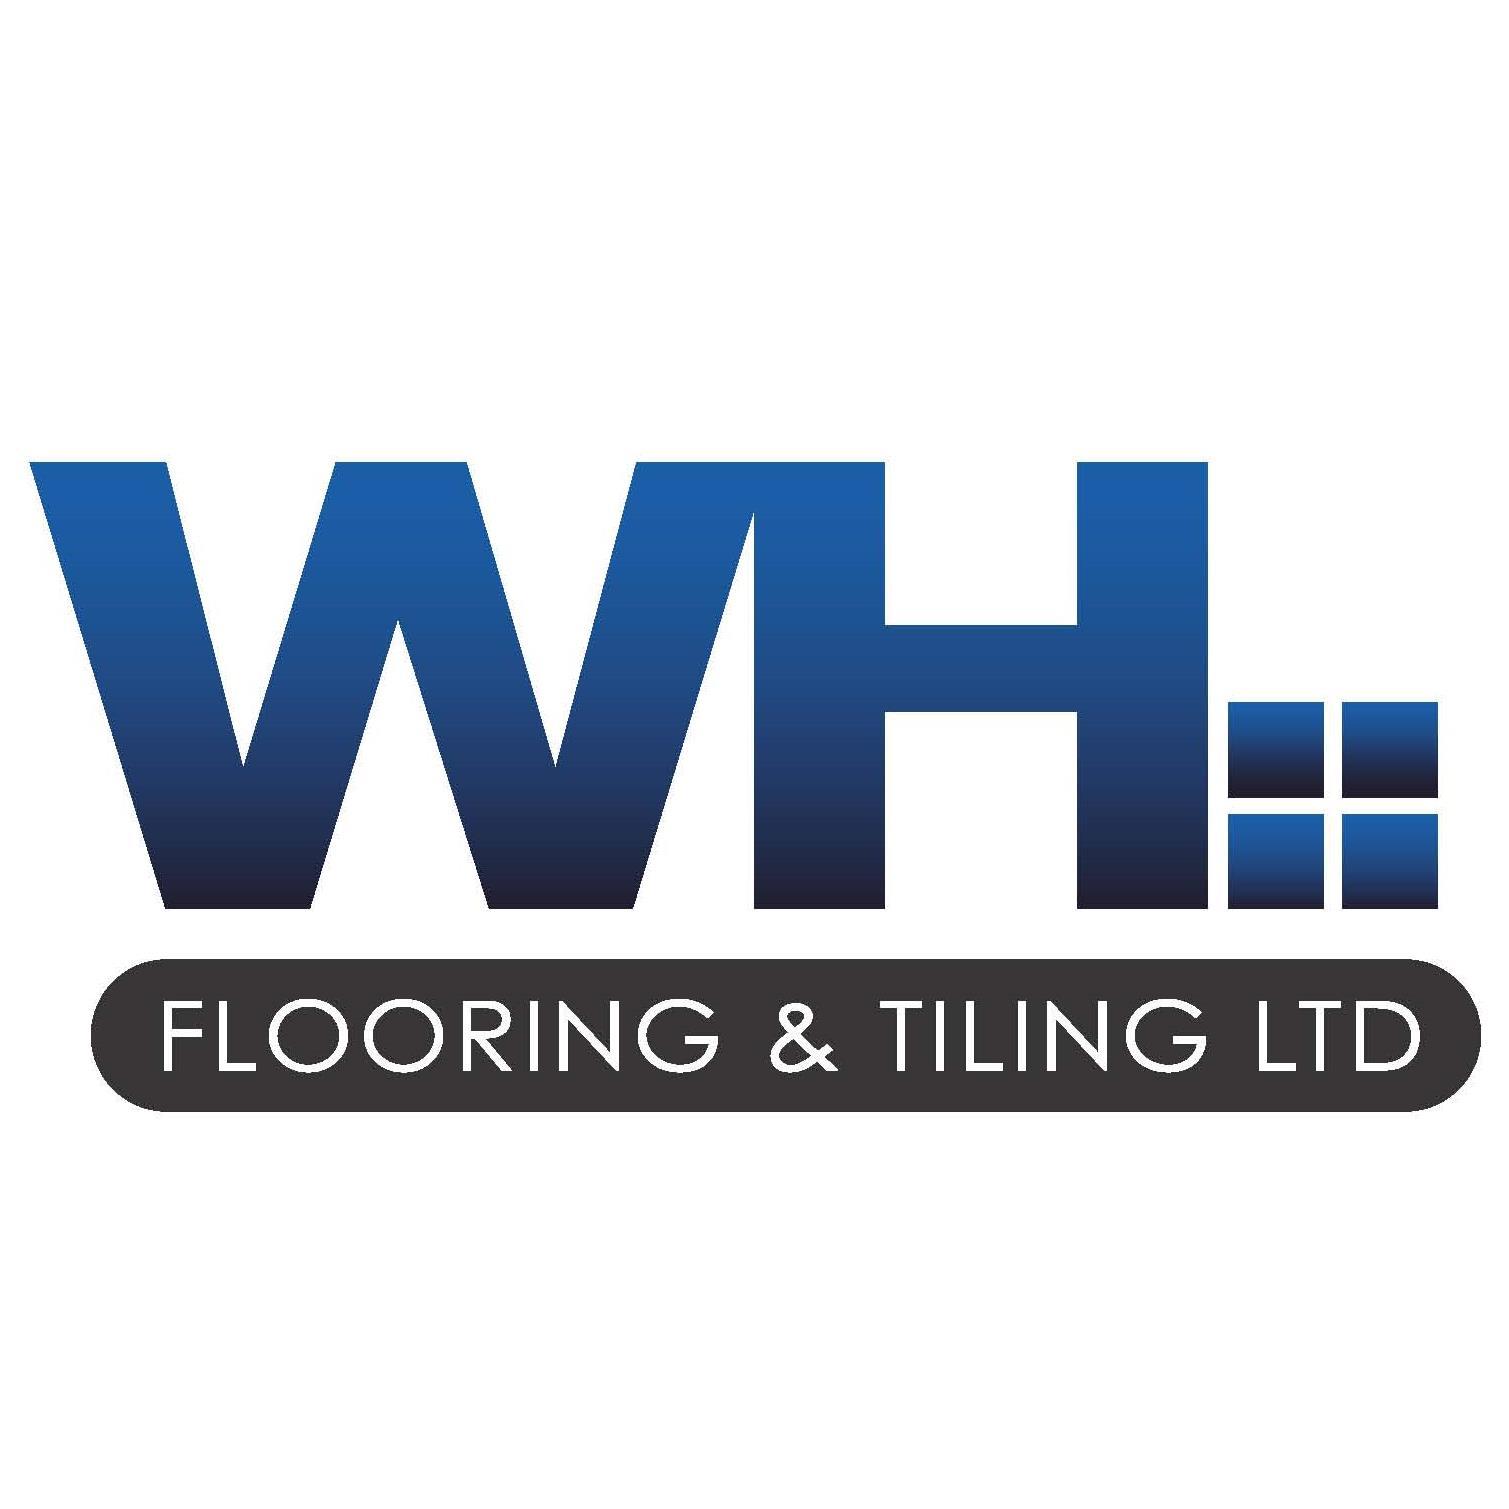 Commercial Tiling, Flooring, Timber Flooring and Altro Whiterock installers. 01274 493 030